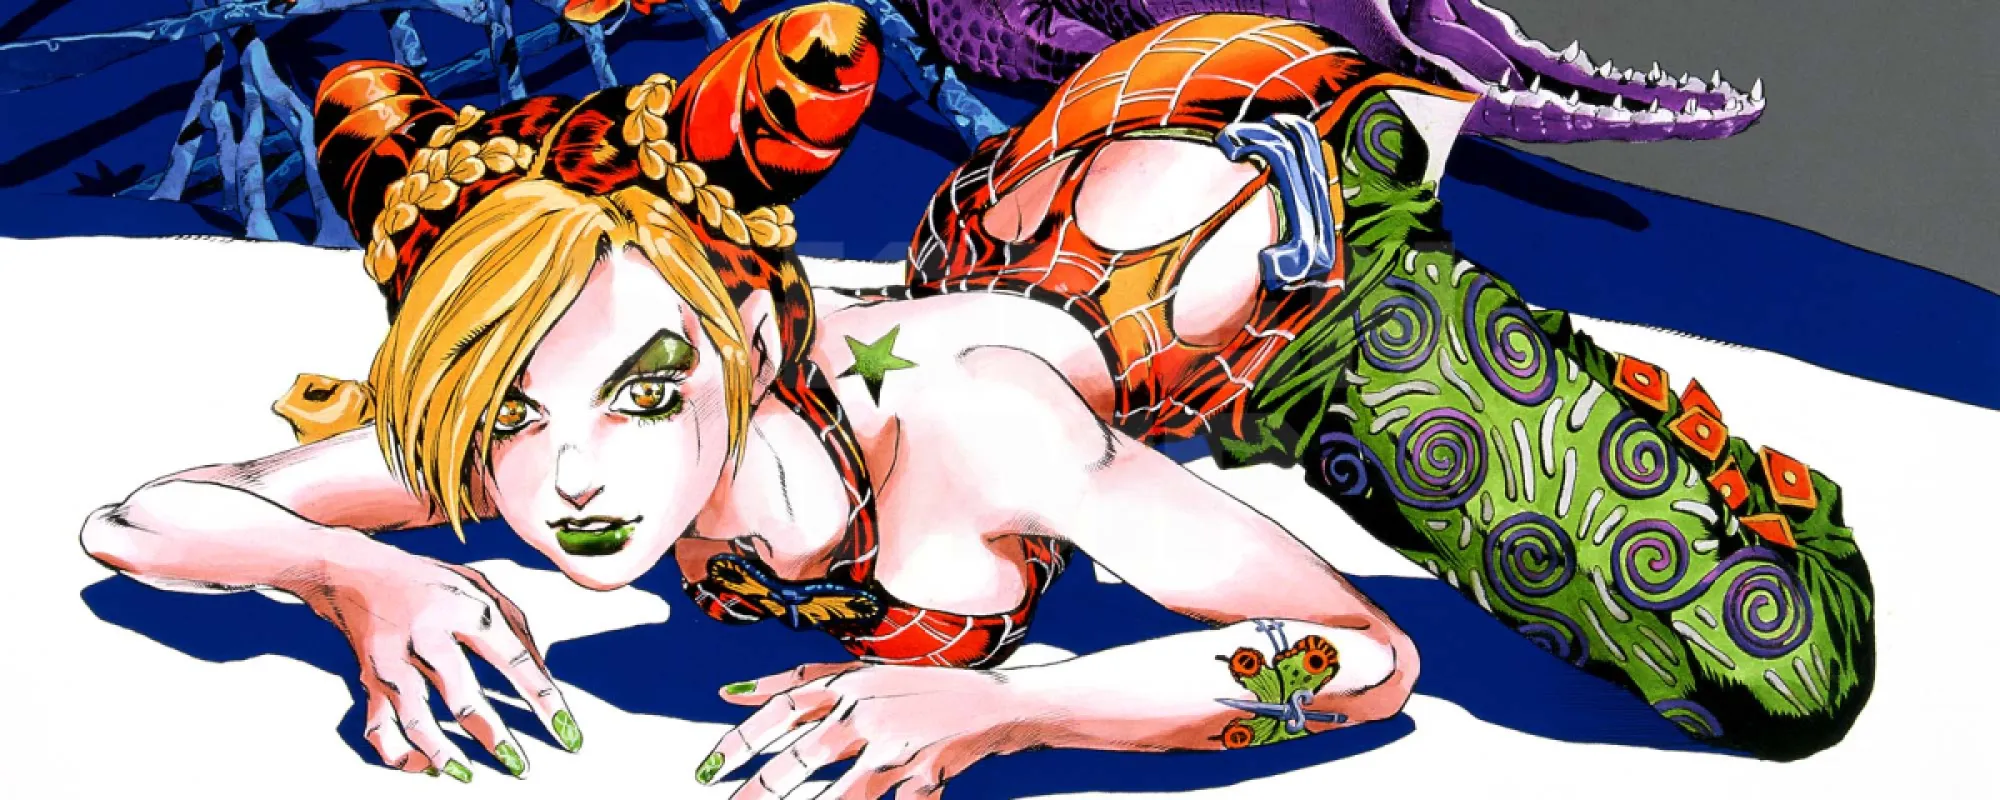 Jolyne in a panel from the manga 'Stone Ocean'